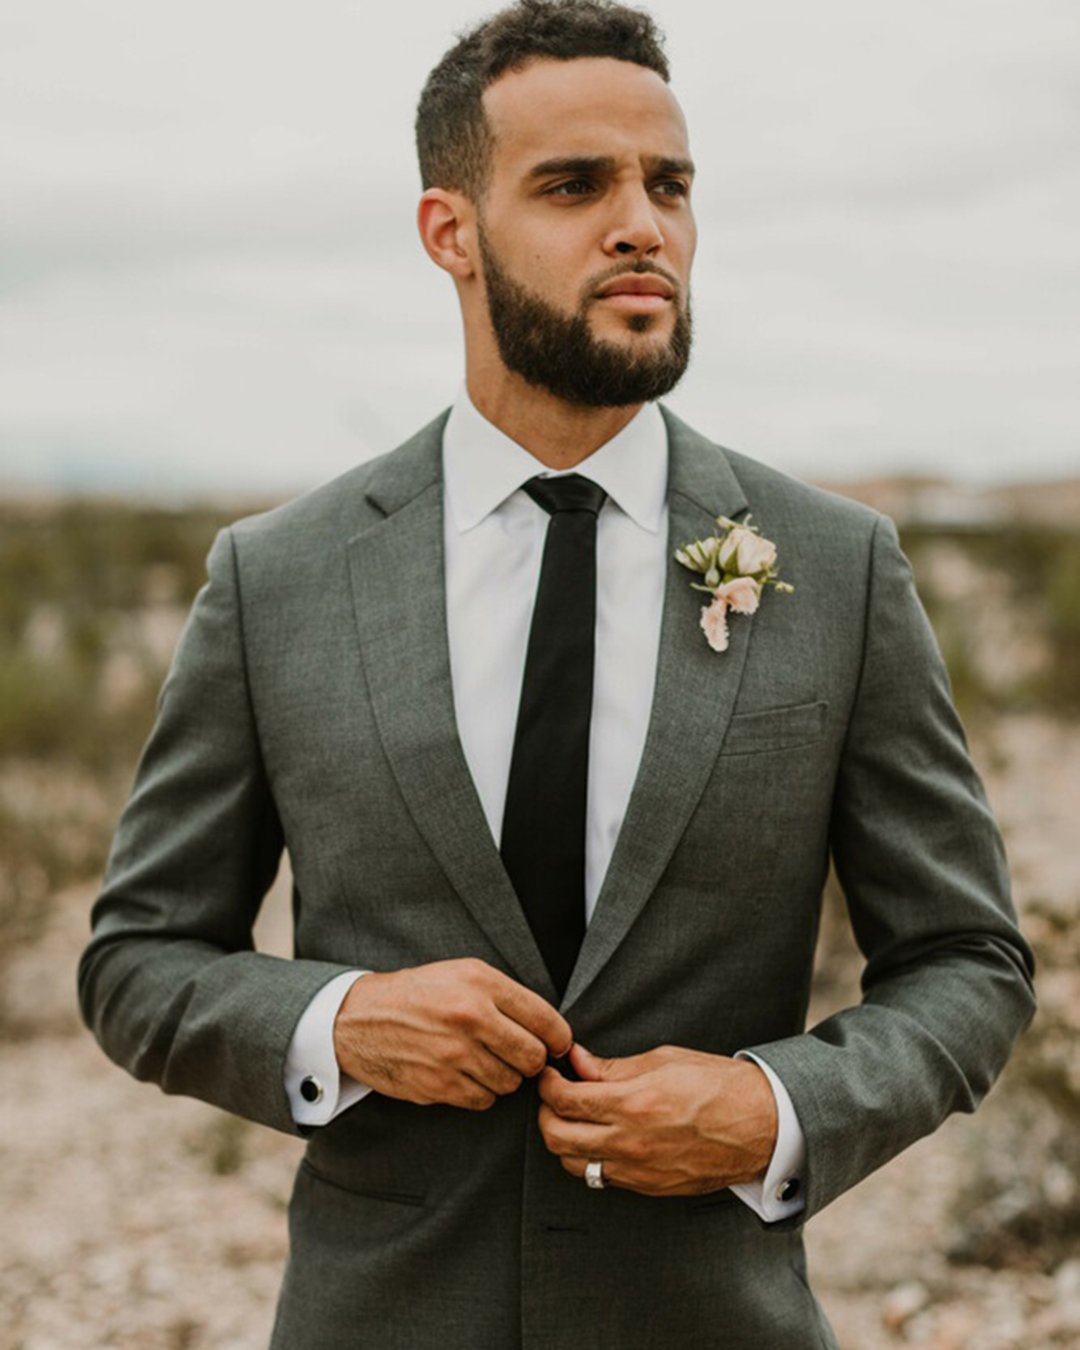 groom suits grey jacket with black tie boutonniere seila stone